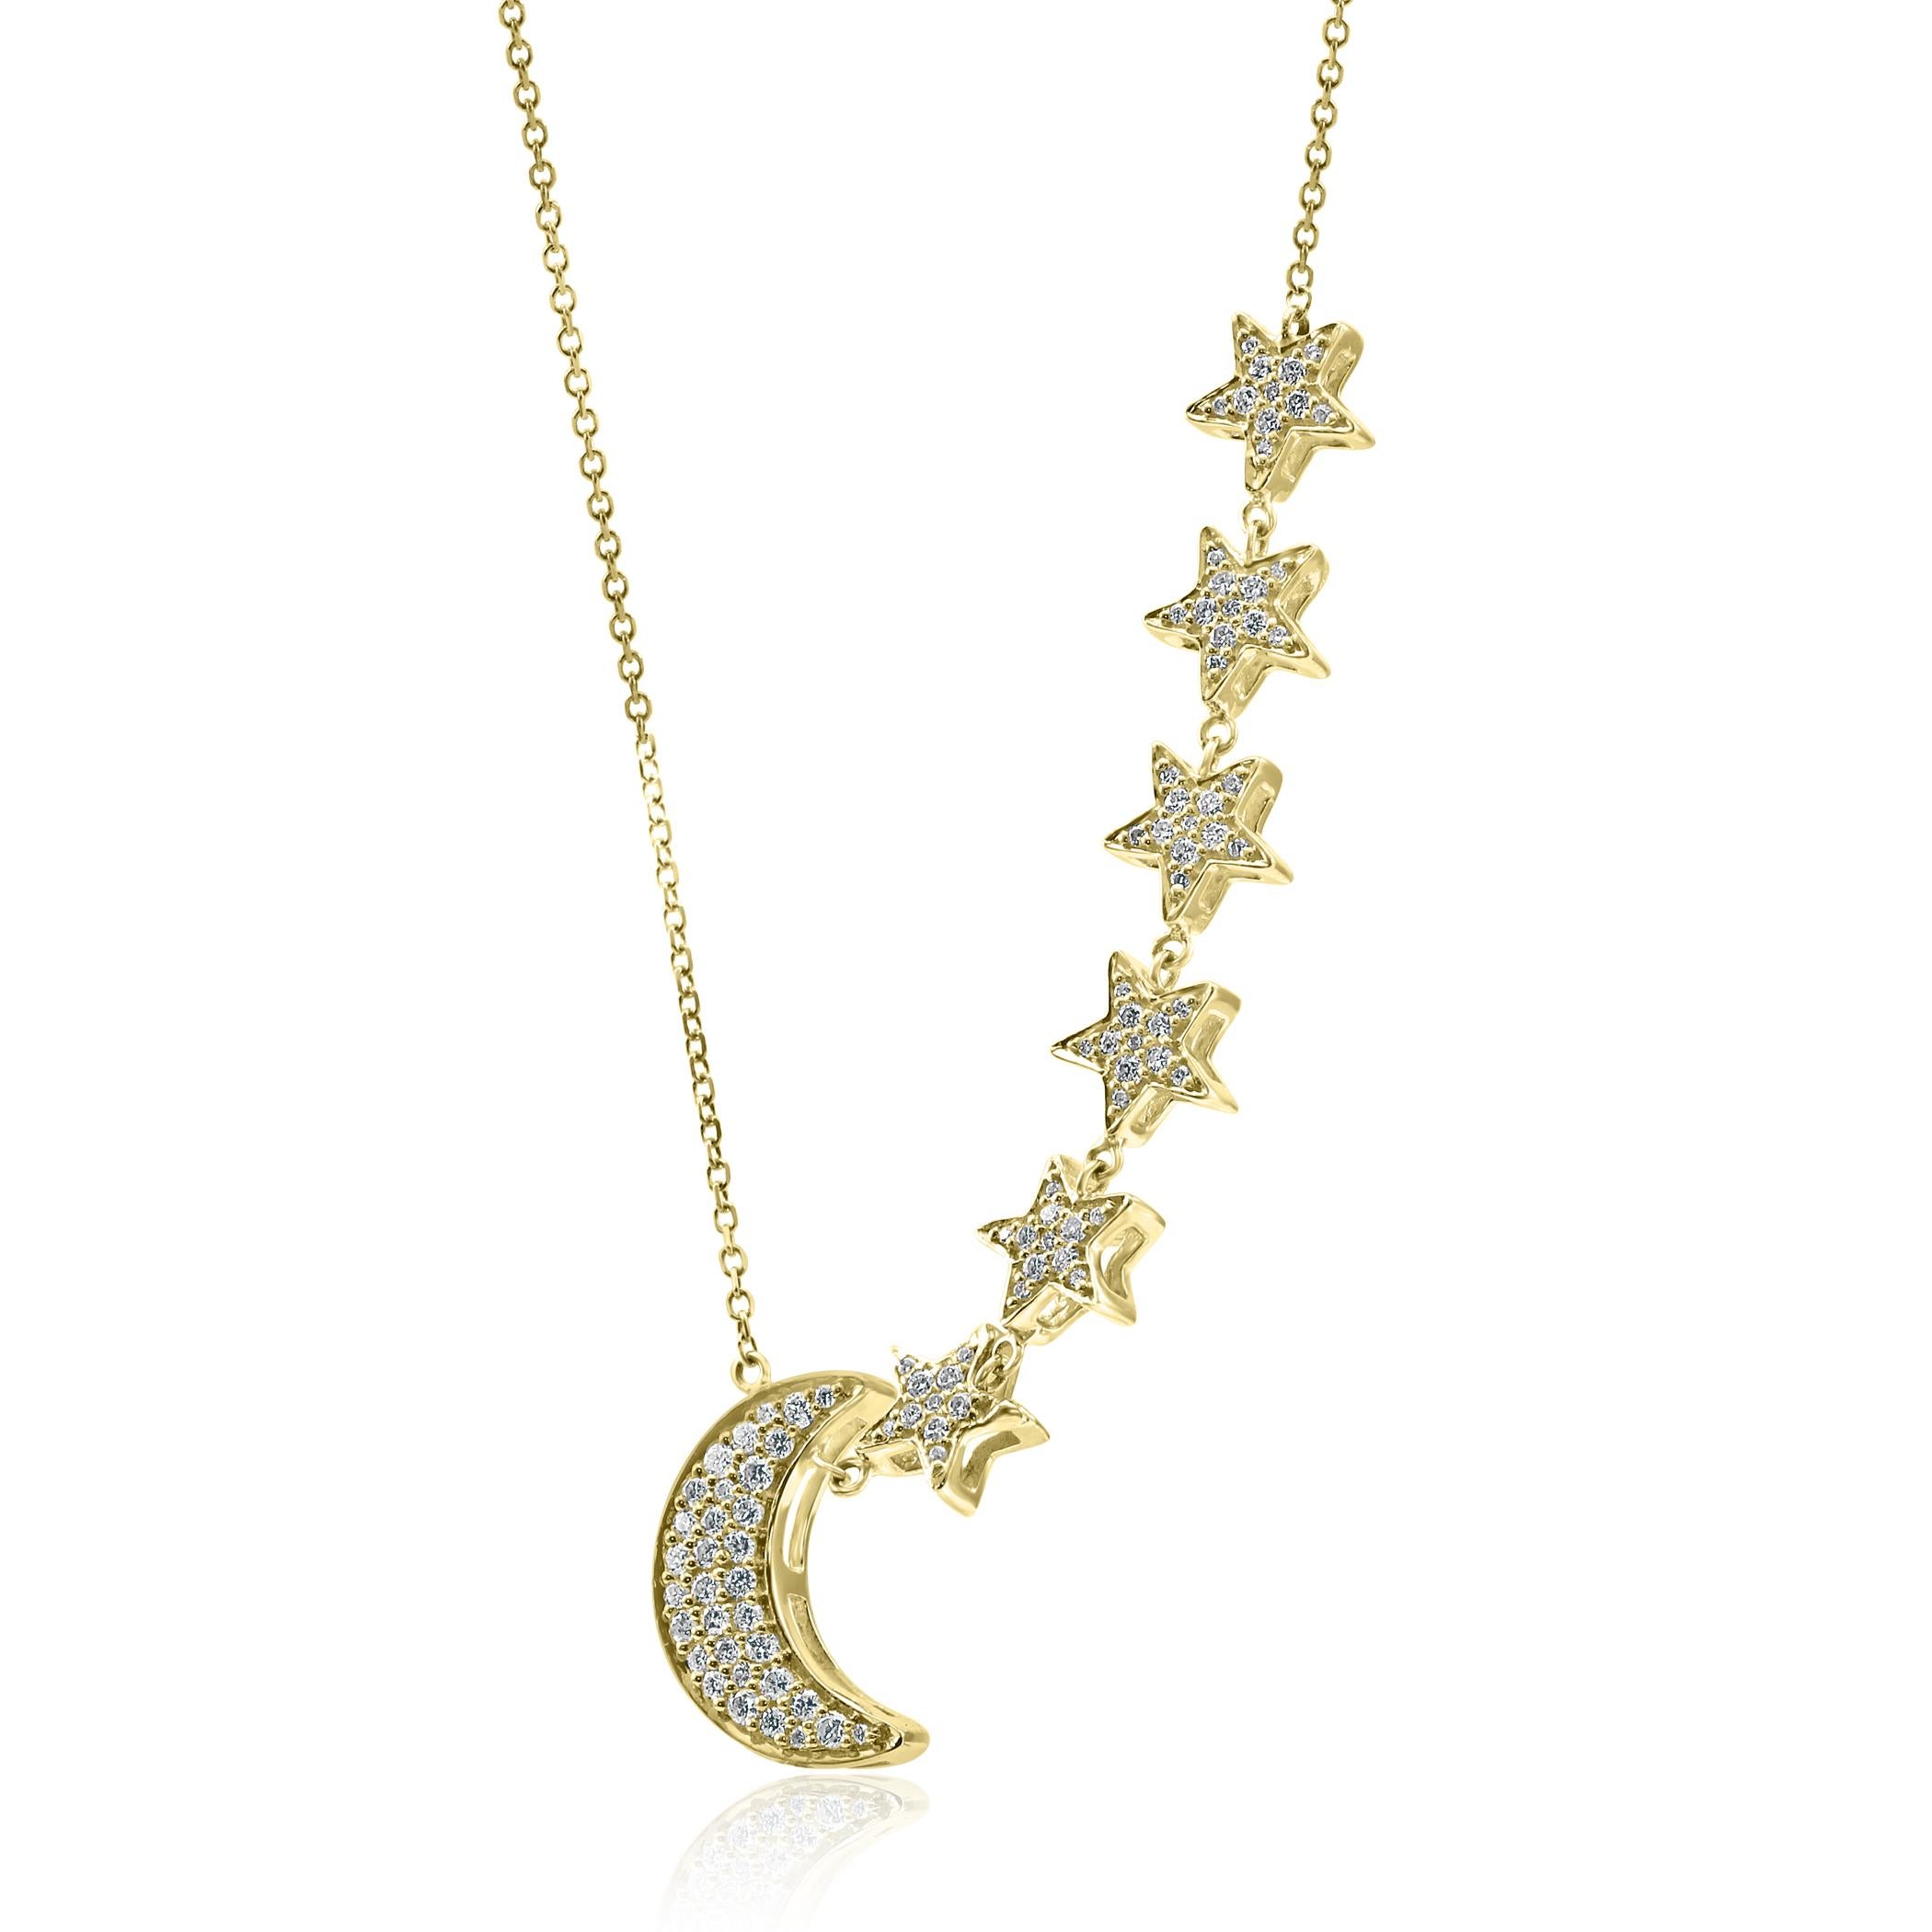 White Round Diamonds SI clarity 0.50 Carat set in stunning 14K Yellow Gold Stars and Moon Fashion Drop Chain Necklace.

Style available in different price ranges and with different center stones, can be customized or custom made as per your